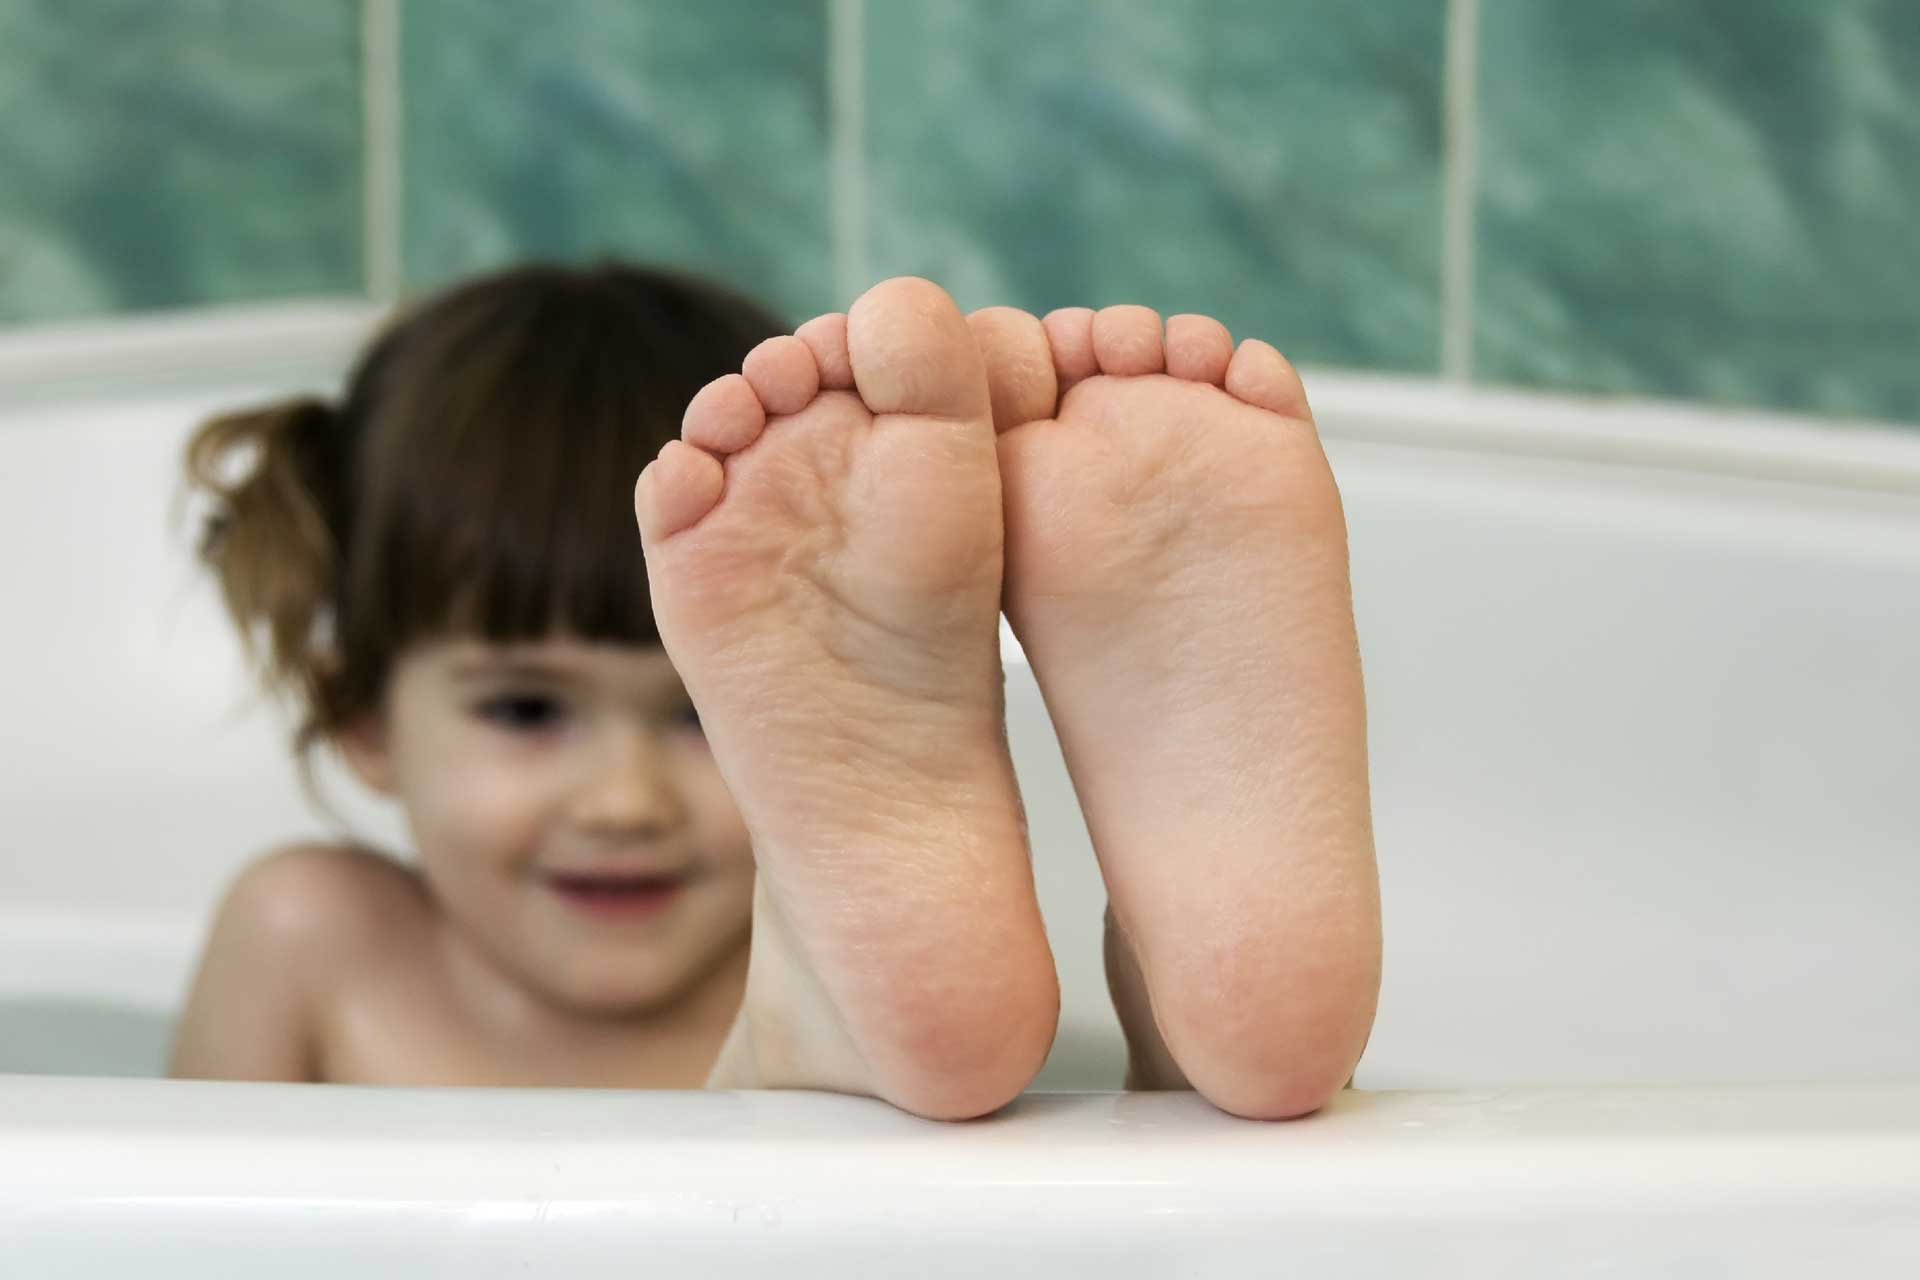 KEEPING YOUR CHILDREN SAFE DURING BATH TIME